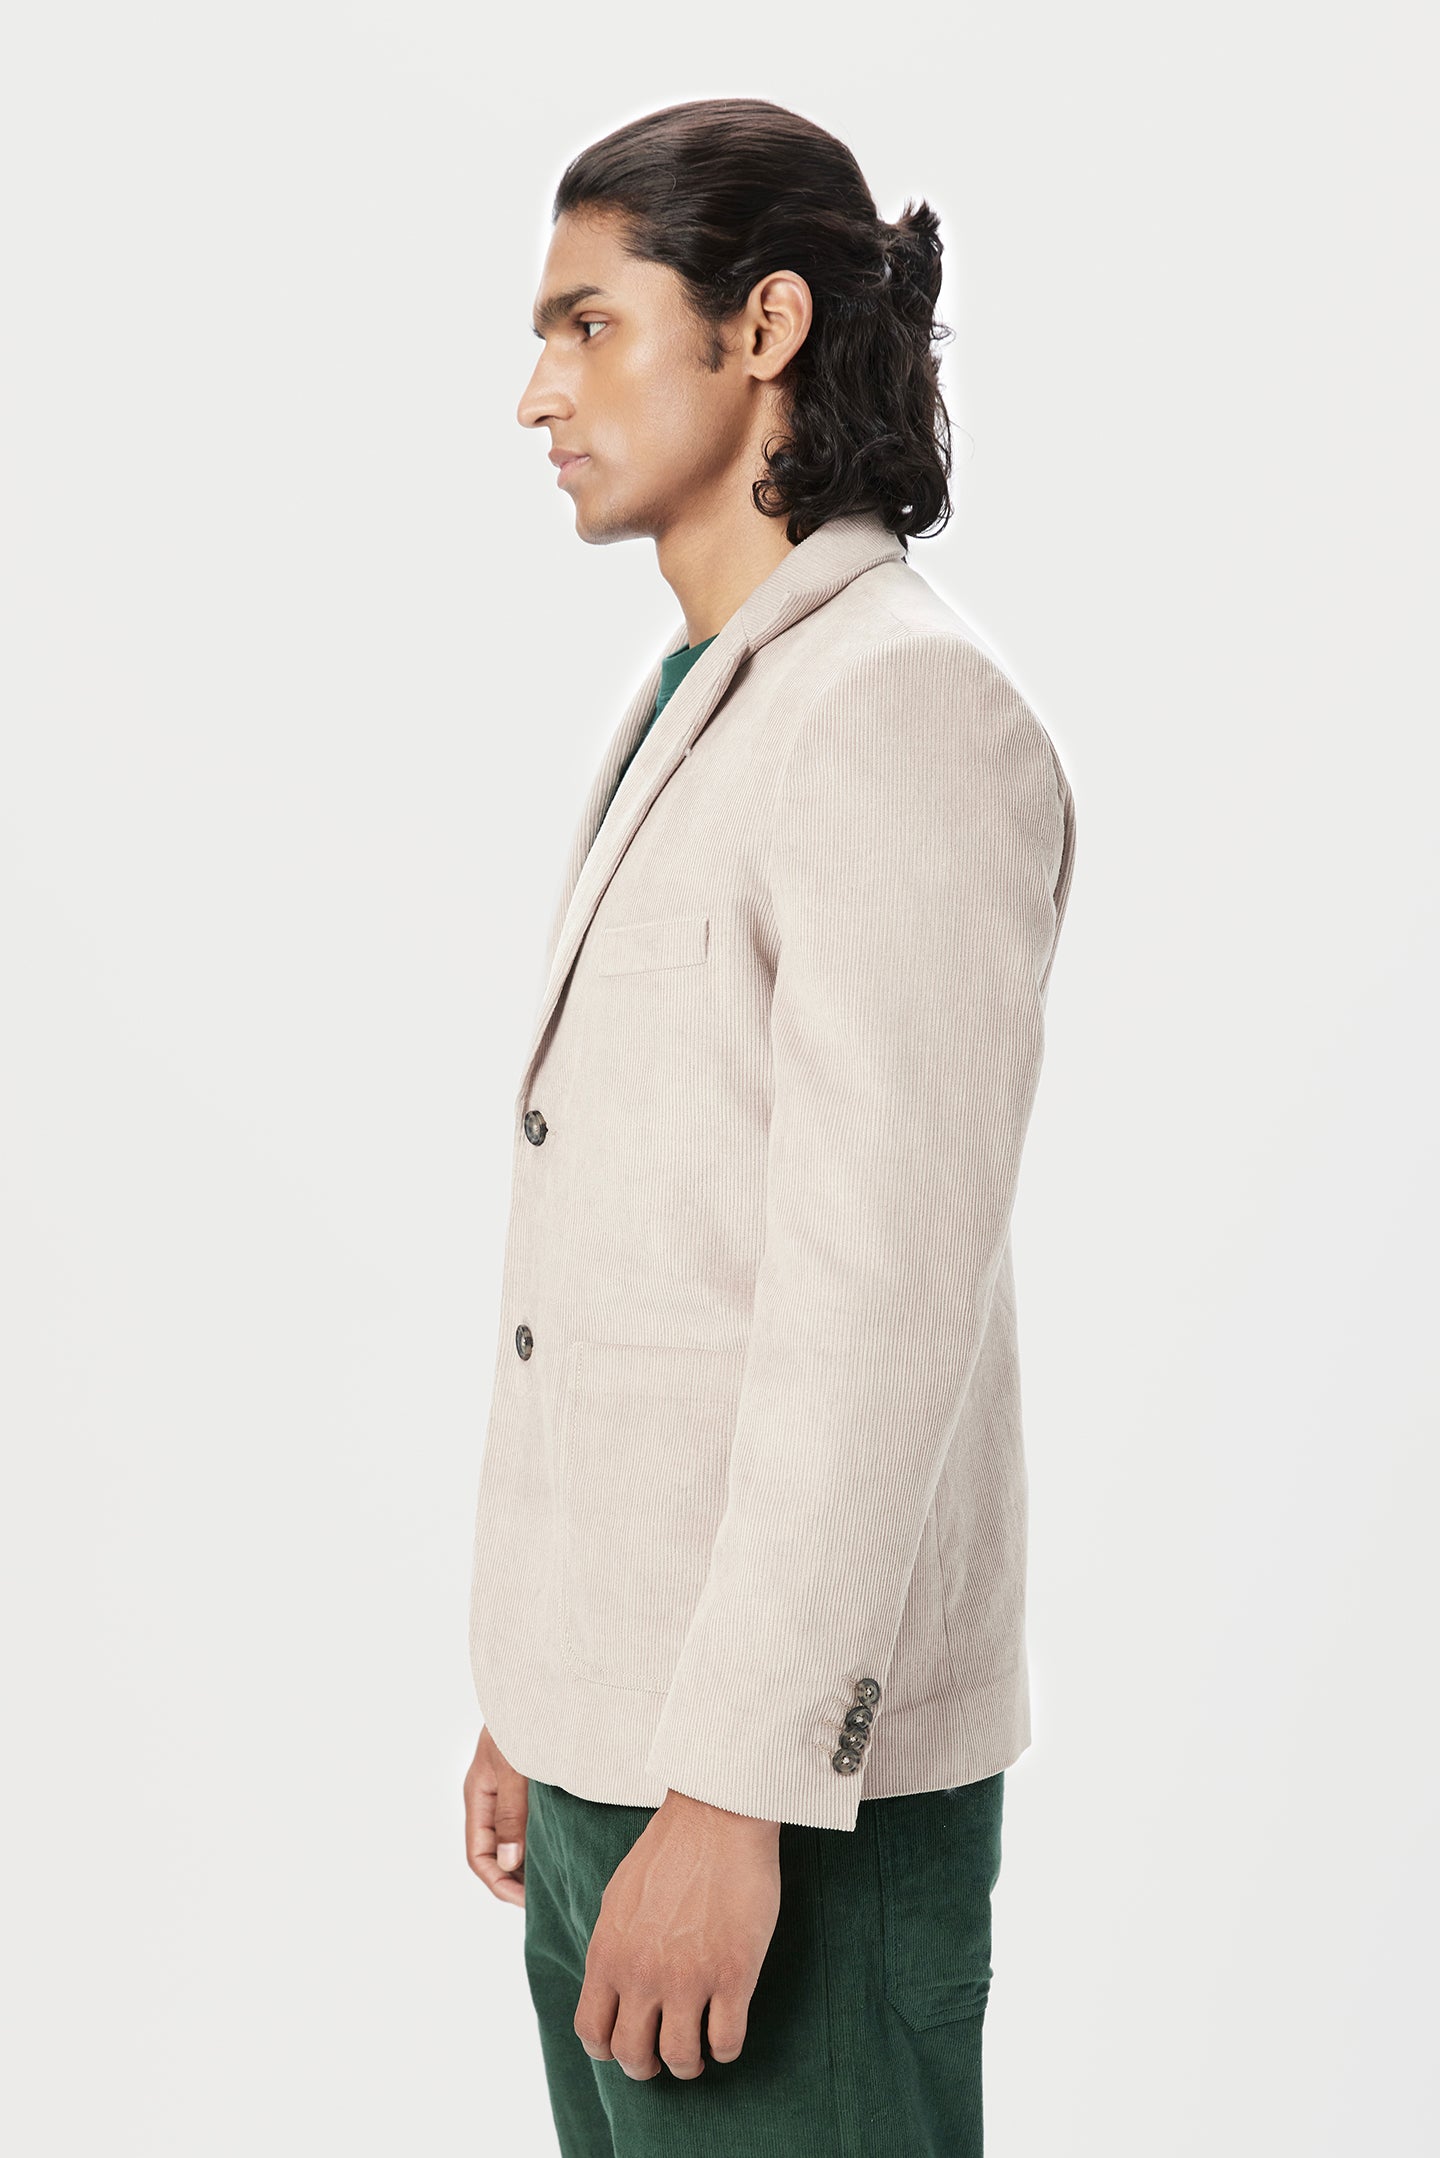 Classic Fit Two-Button Jacket with Fish Printed Lining